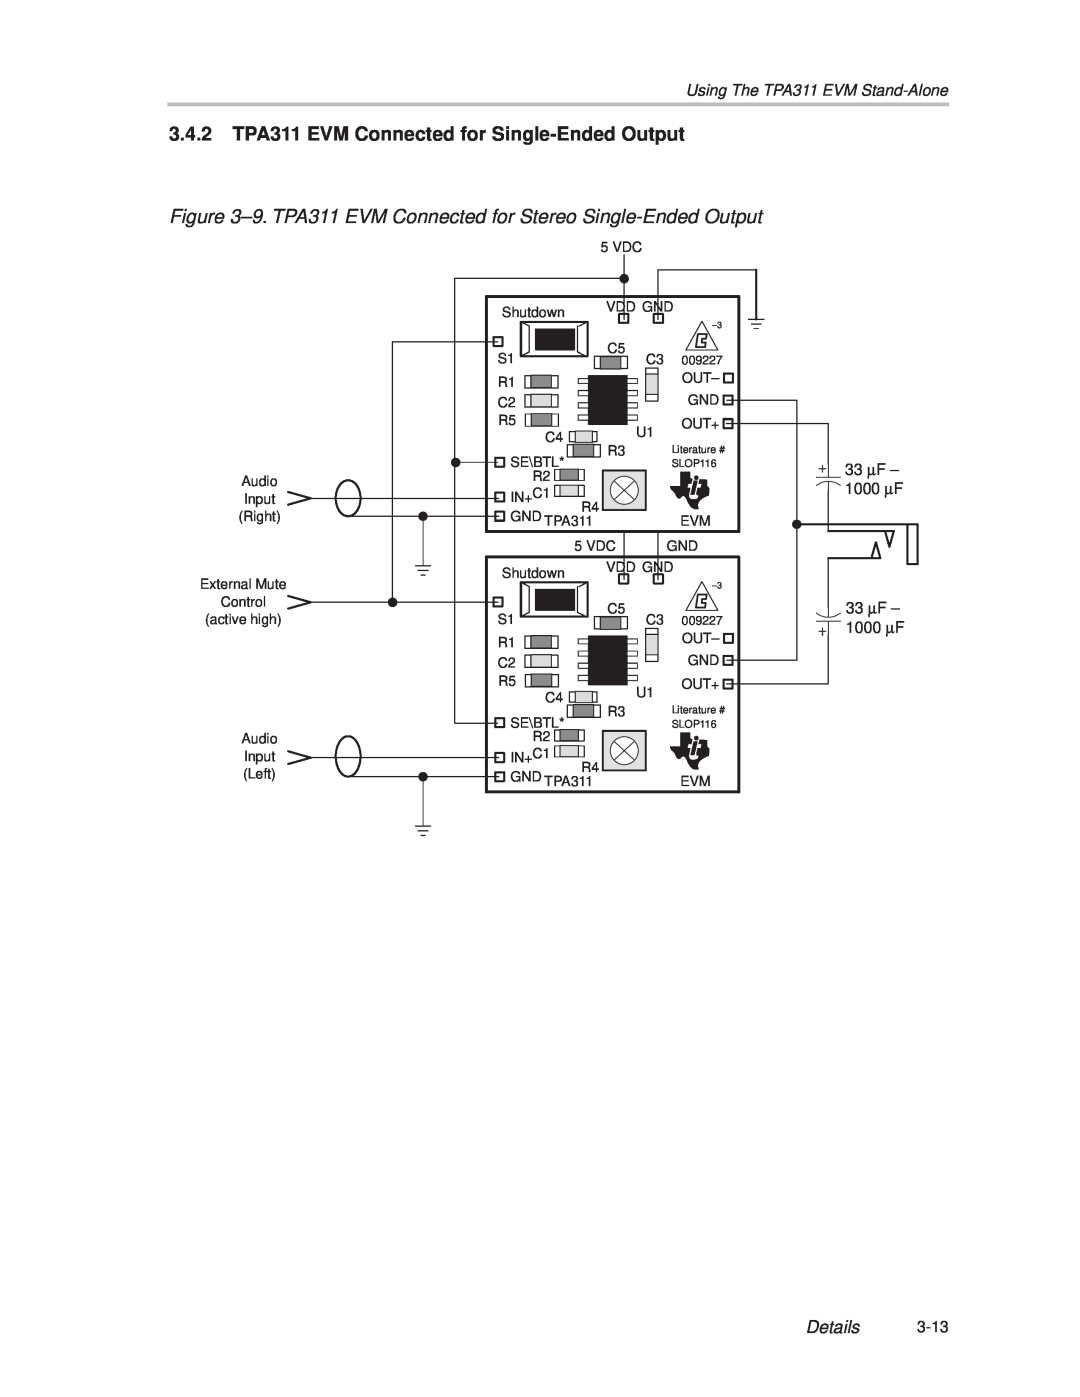 Texas Instruments TPA 311 3.4.2 TPA311 EVM Connected for Single-Ended Output, Details, + 33 ∝F ± 1000 ∝F 33 ∝F ± + 1000 ∝F 